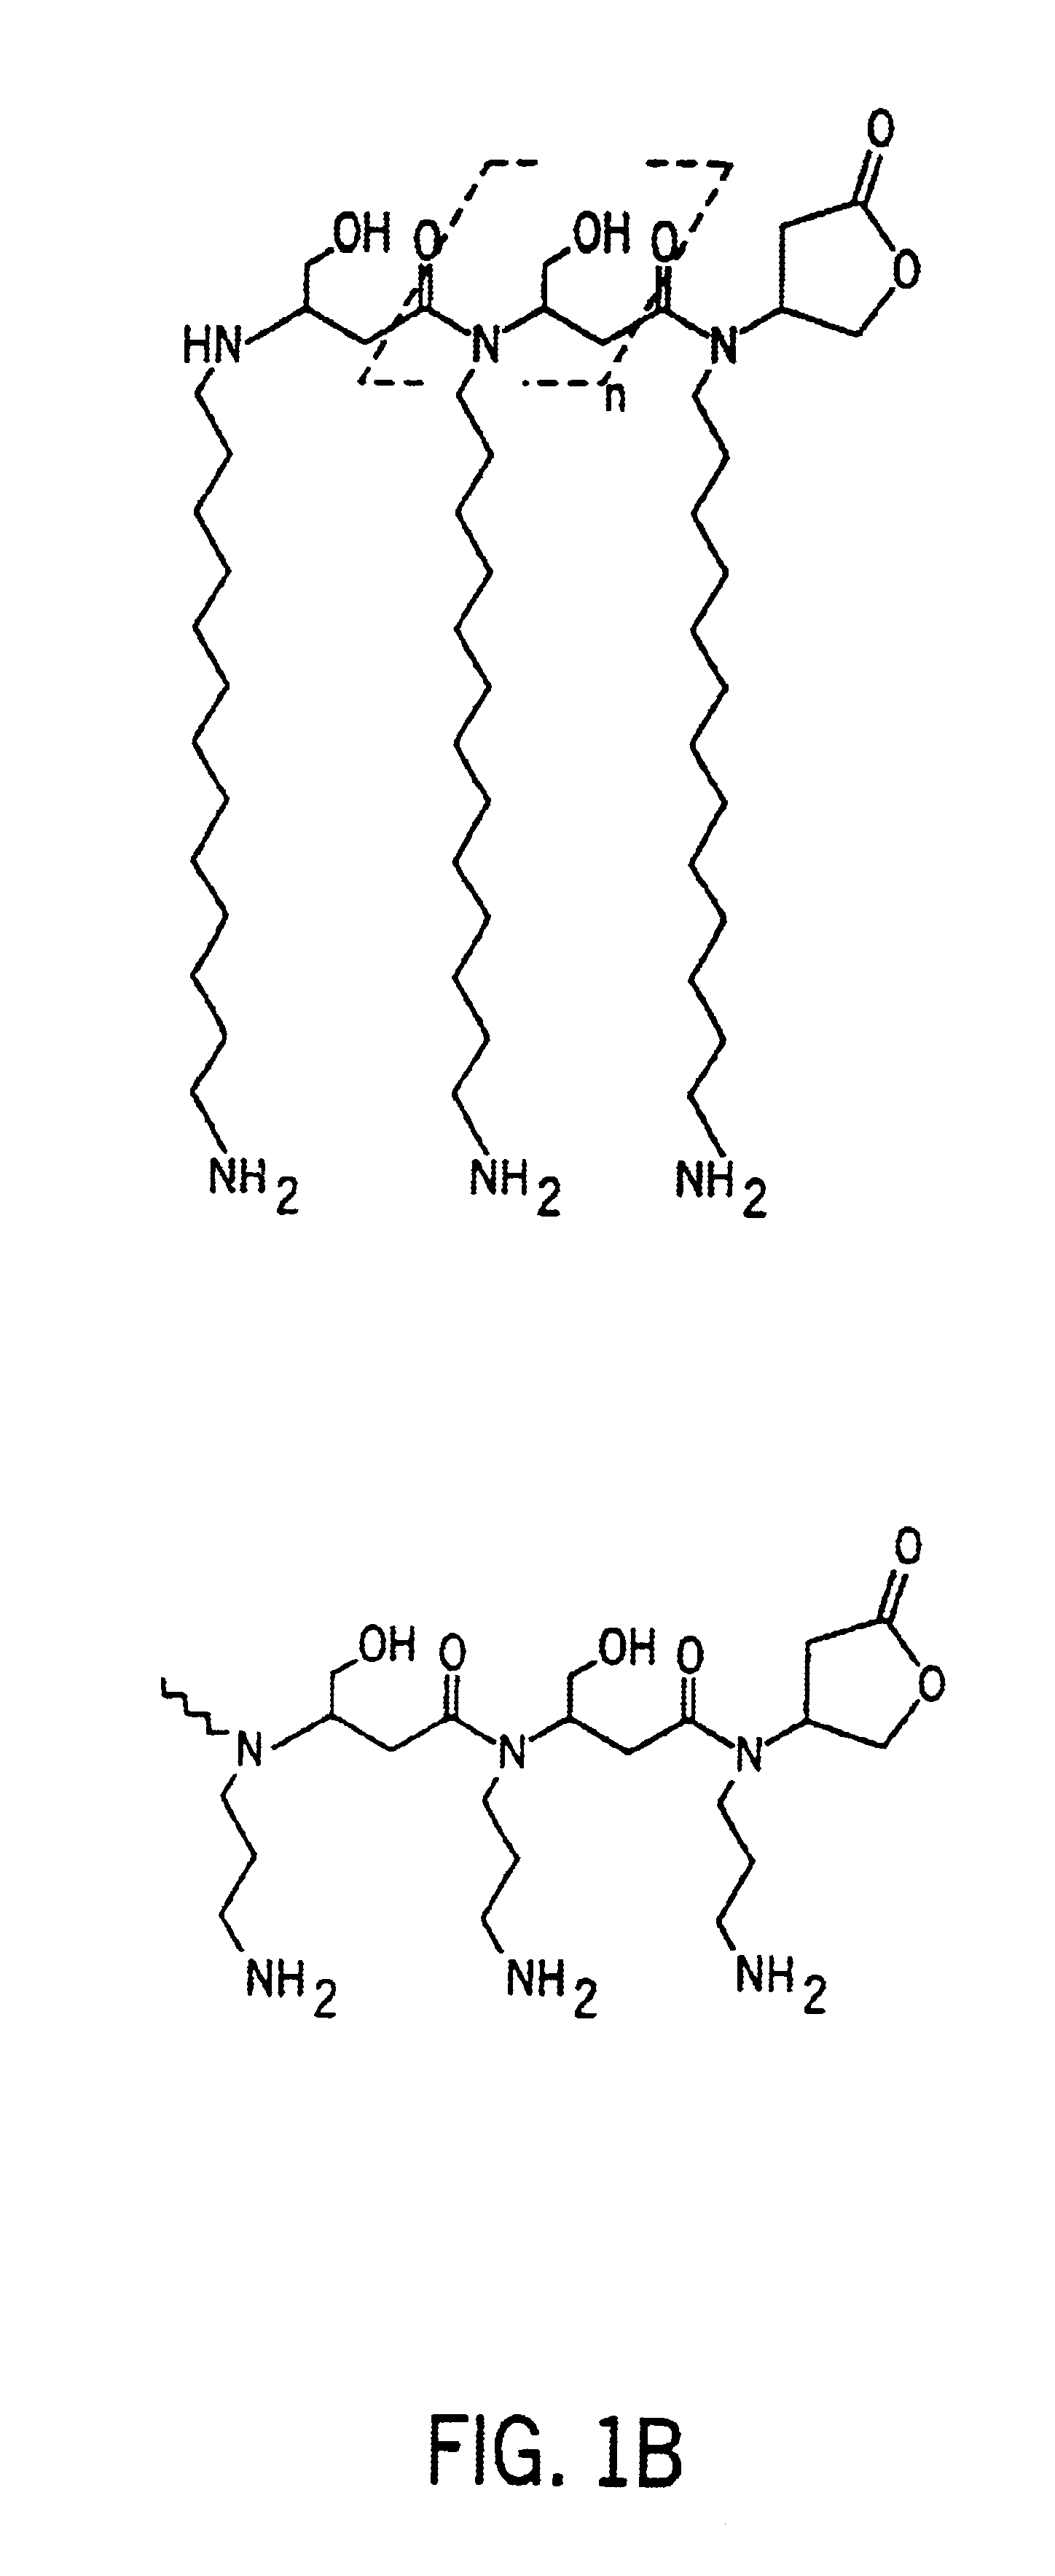 Two dimensional polymer that generates nitric oxide